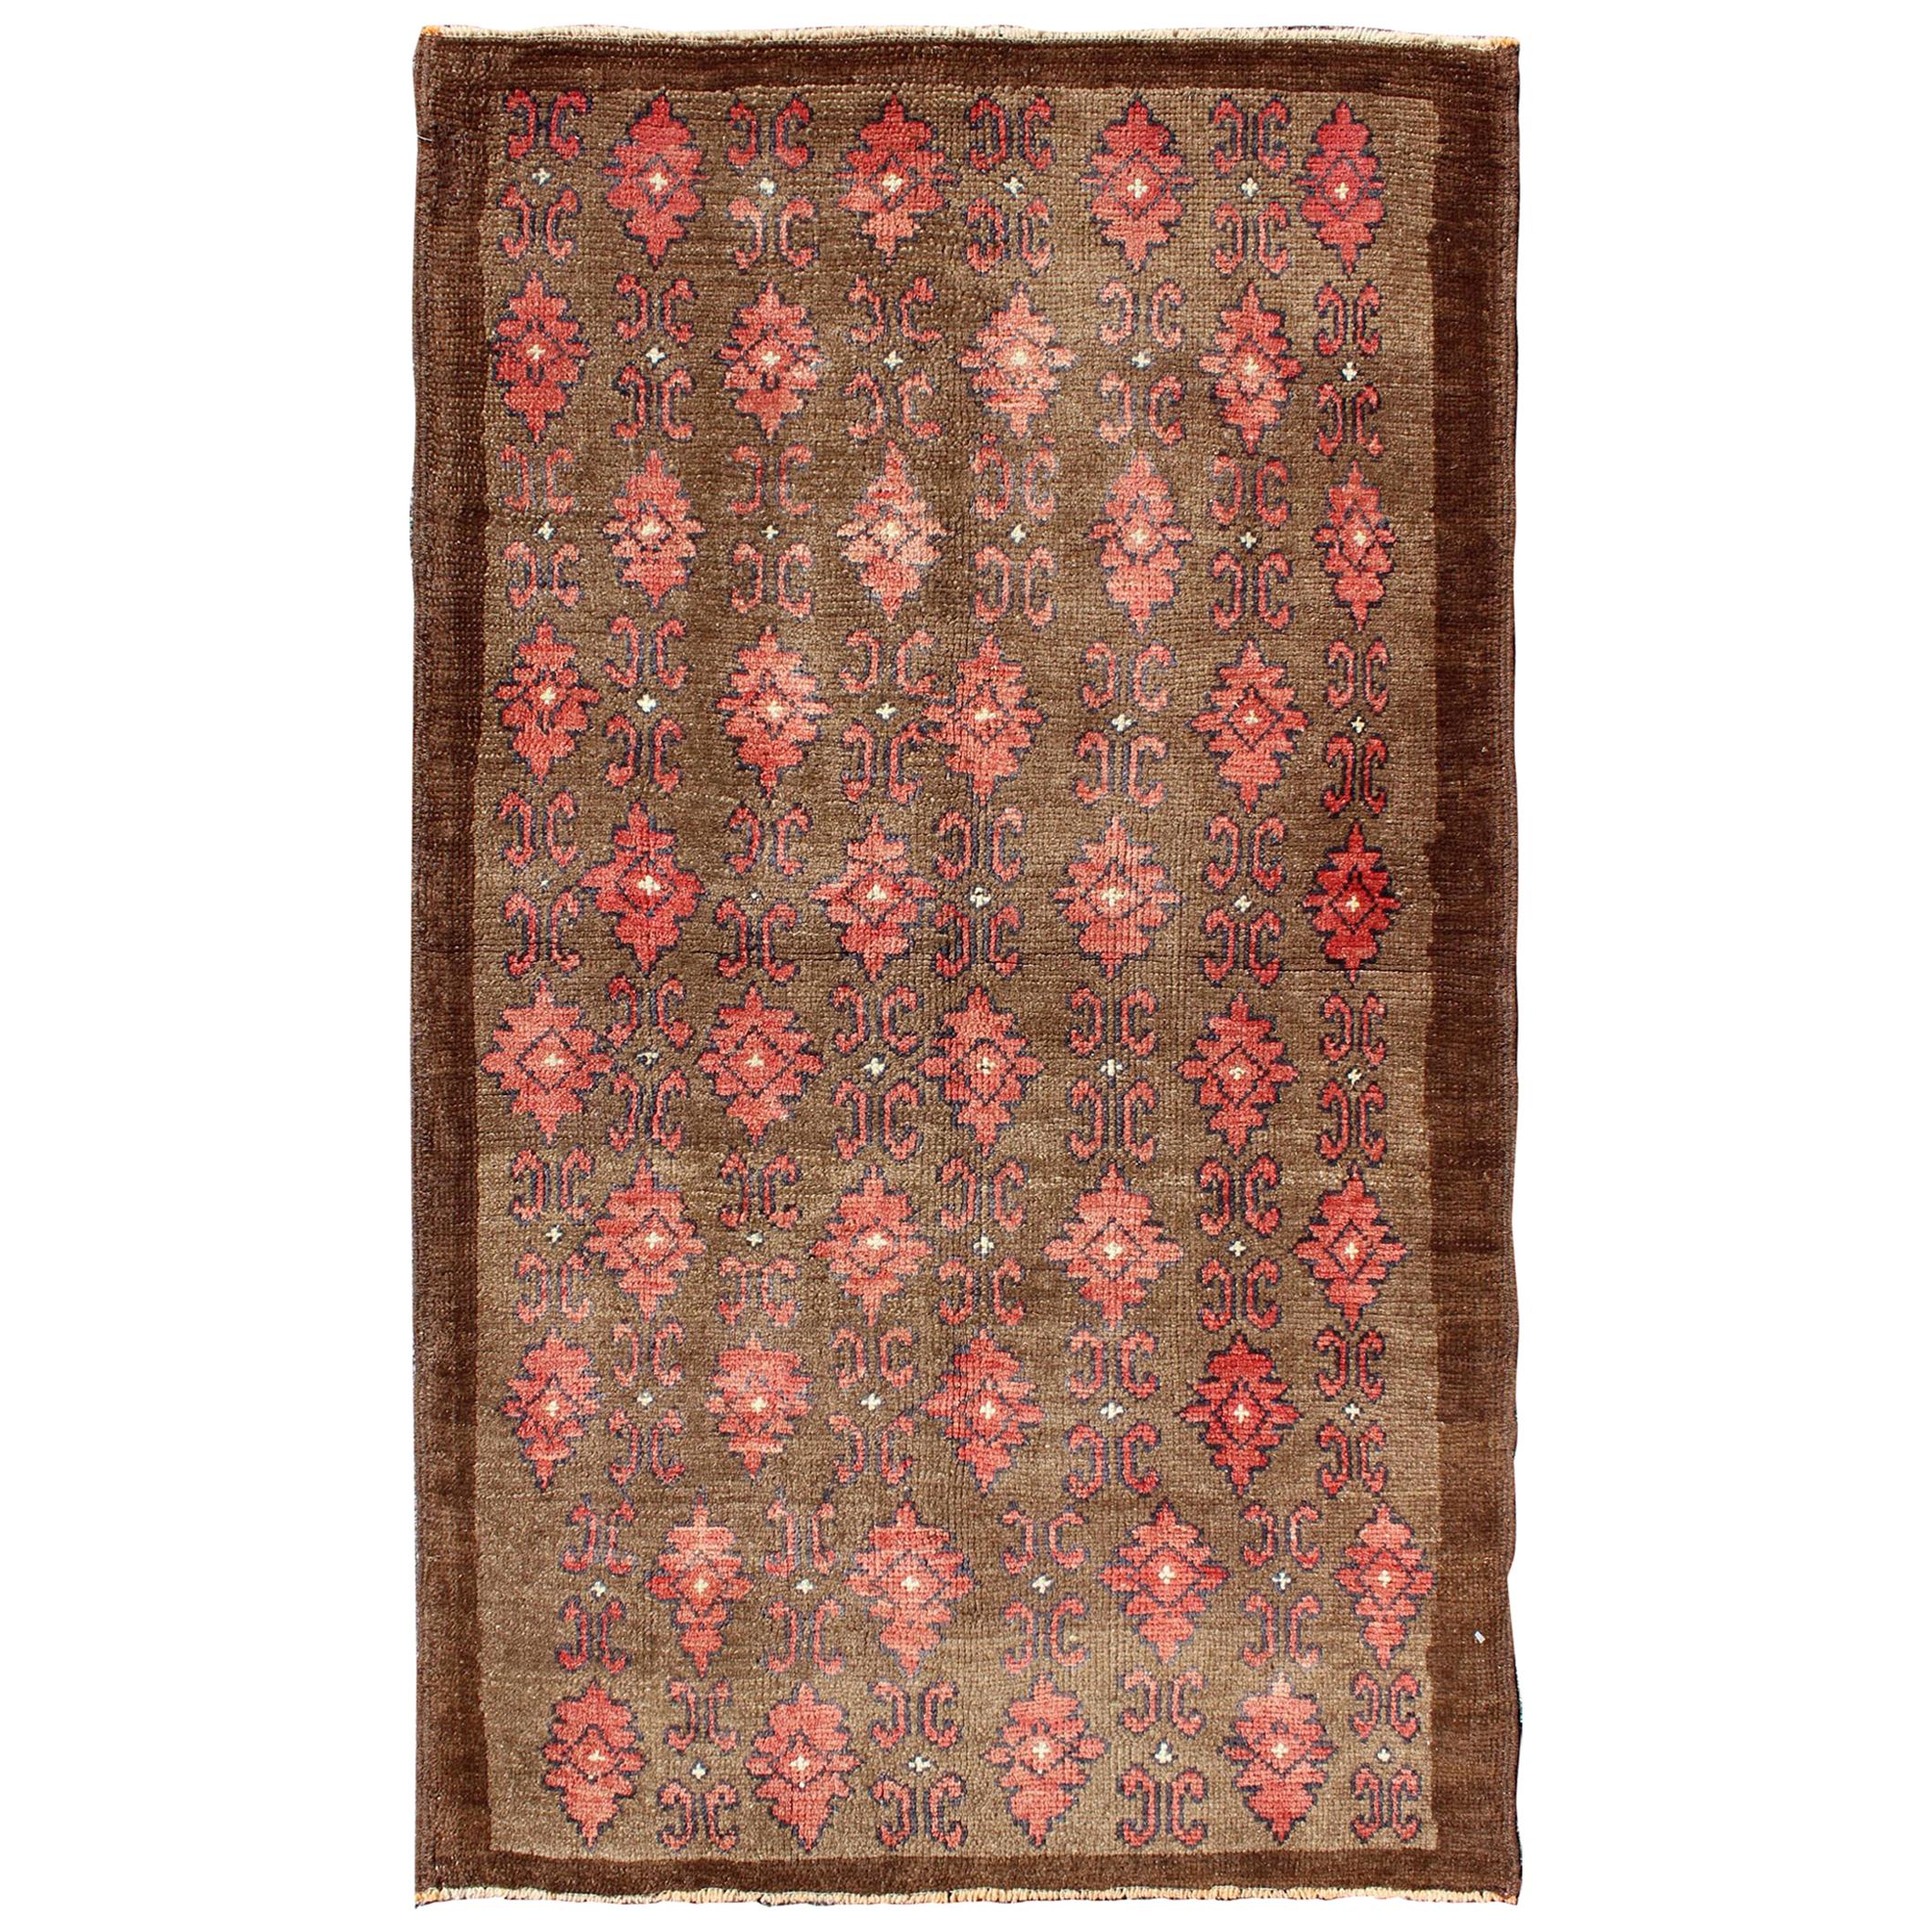 Red and Brown Vintage Turkish Oushak Rug with Repeating Vertical Motif Design For Sale